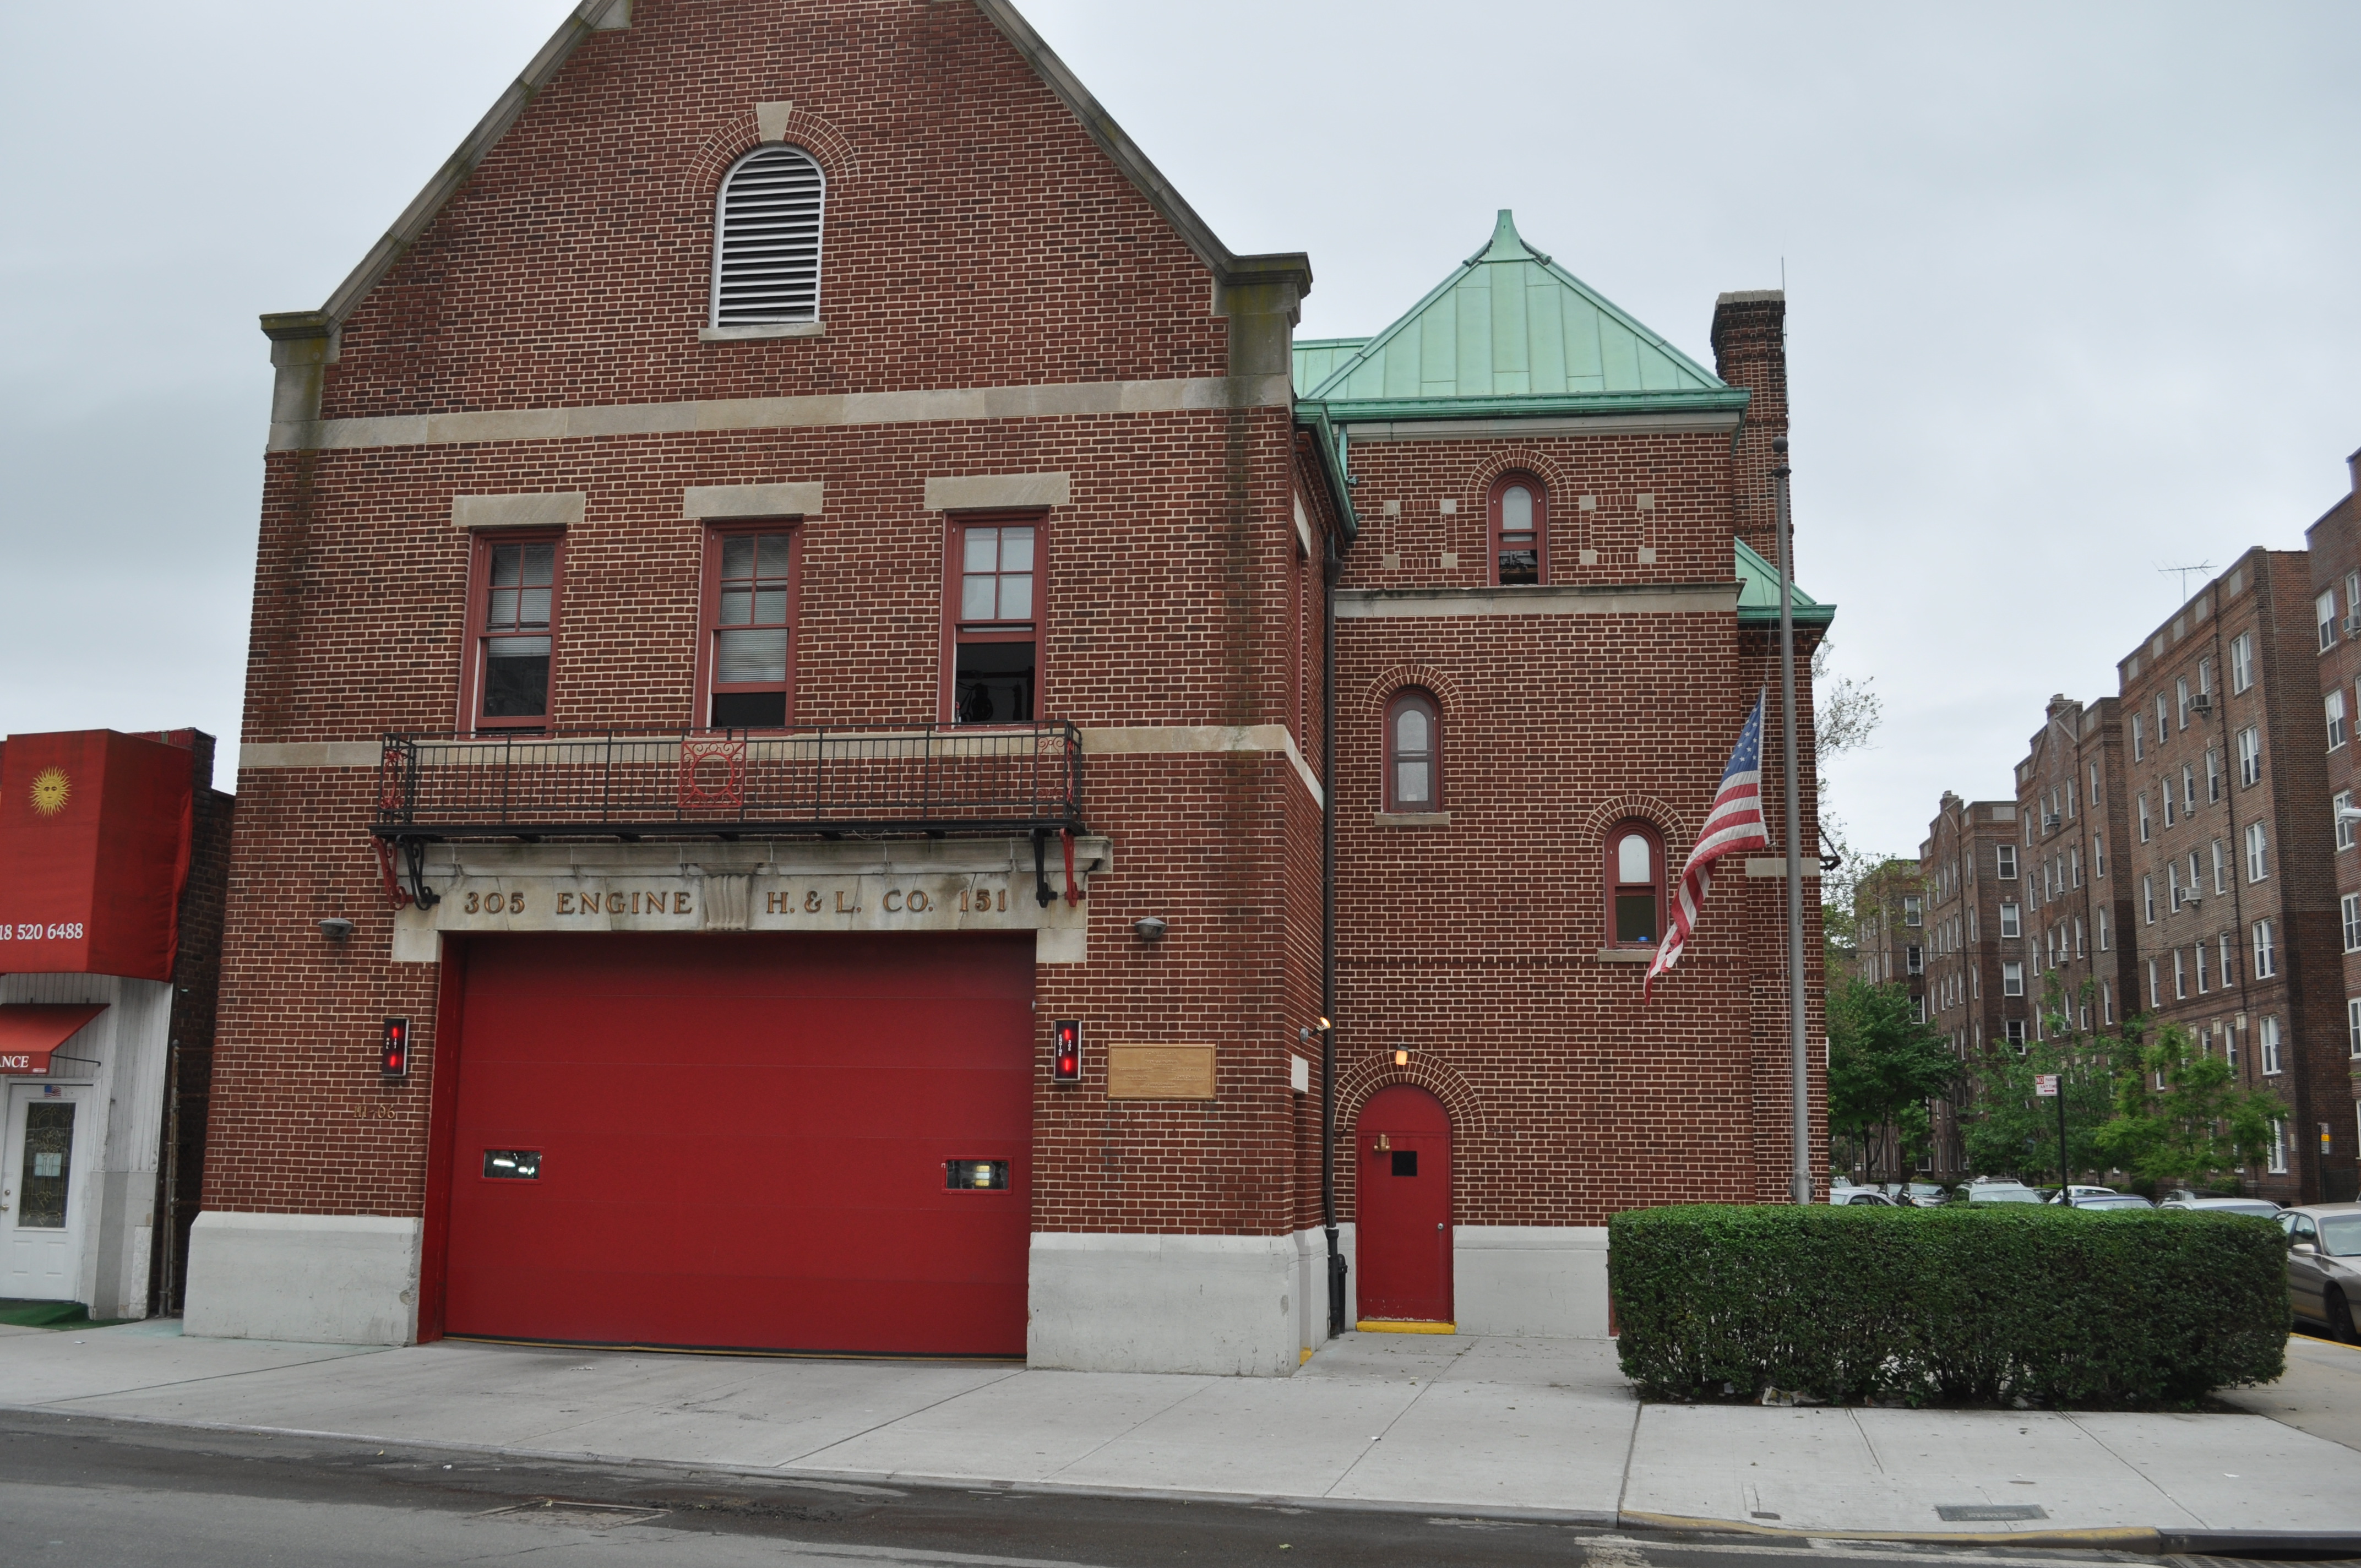 About the Firehouse